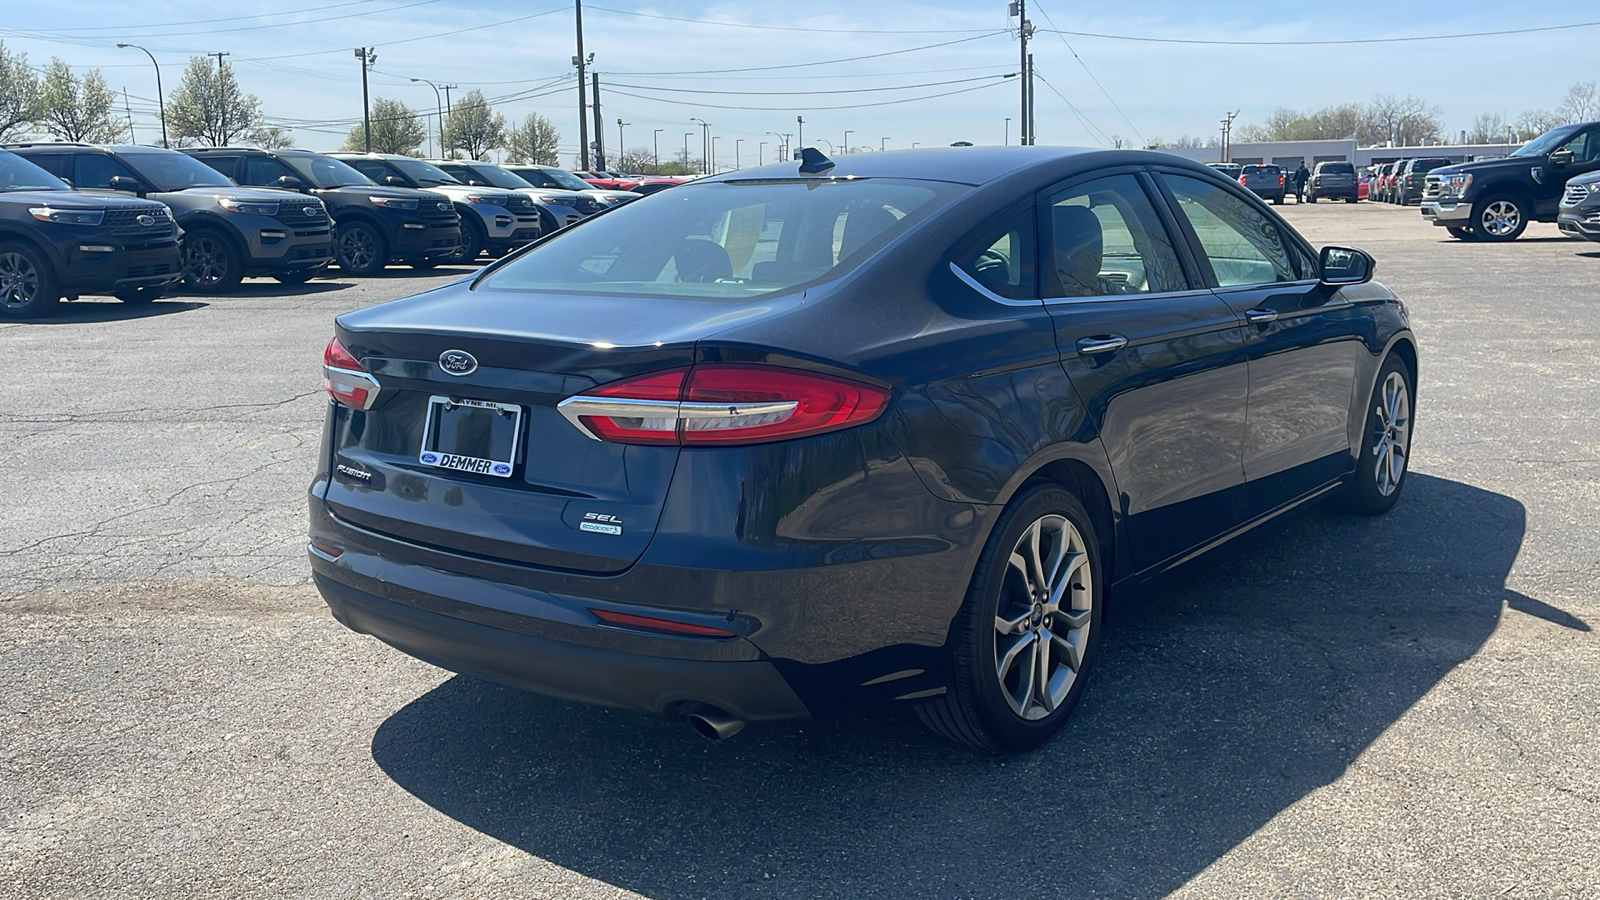 2020 Ford Fusion SEL 4